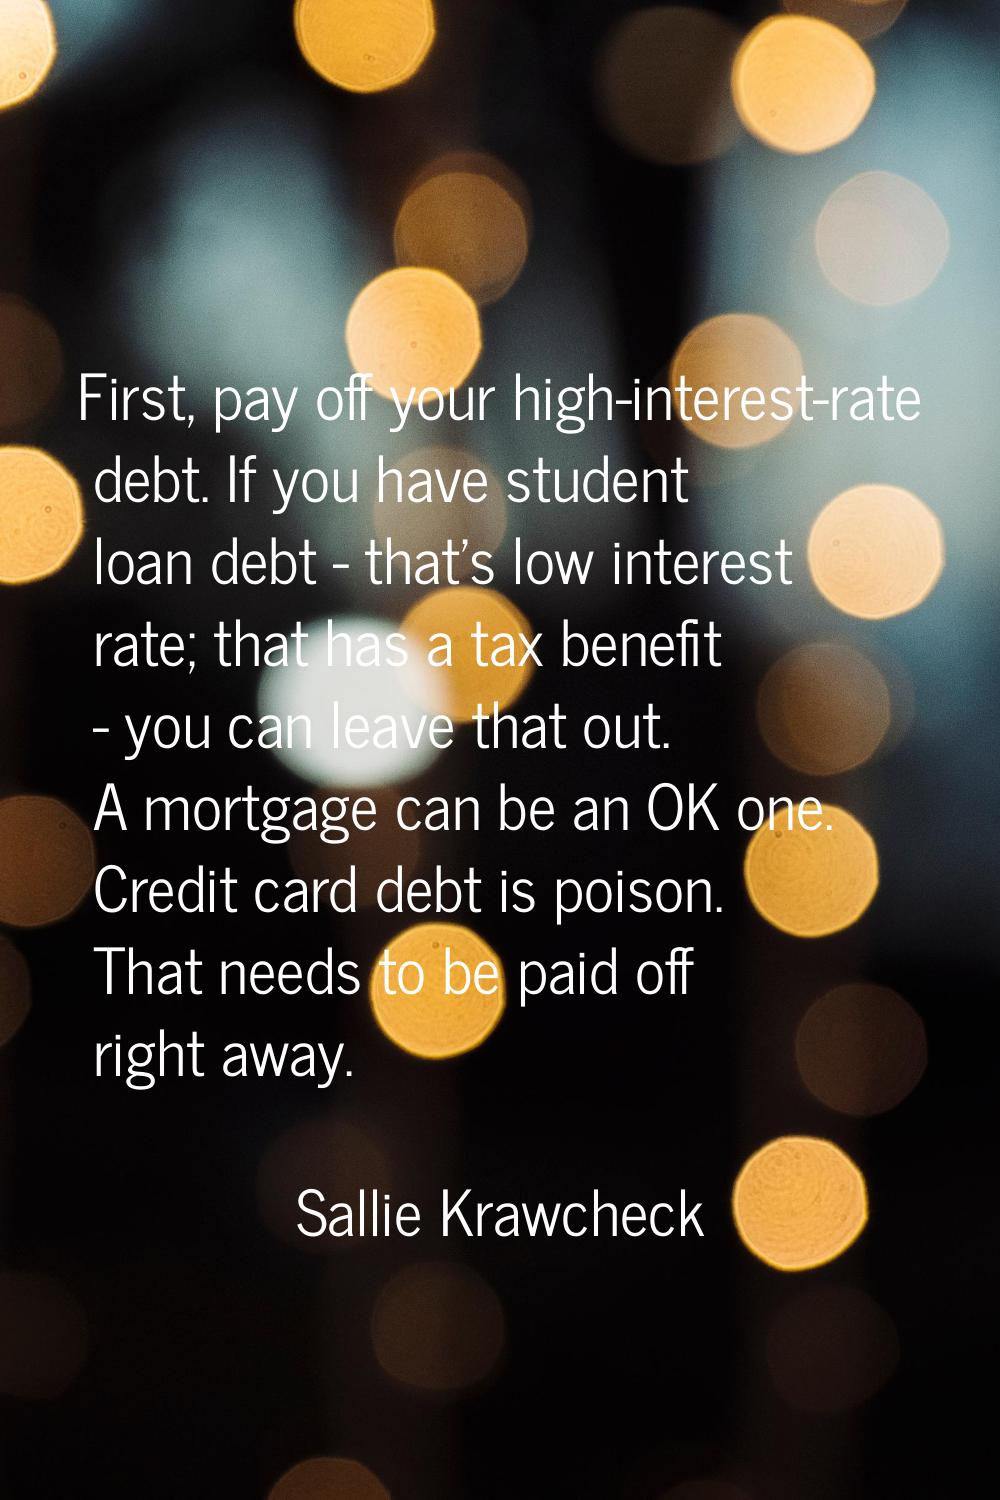 First, pay off your high-interest-rate debt. If you have student loan debt - that's low interest ra